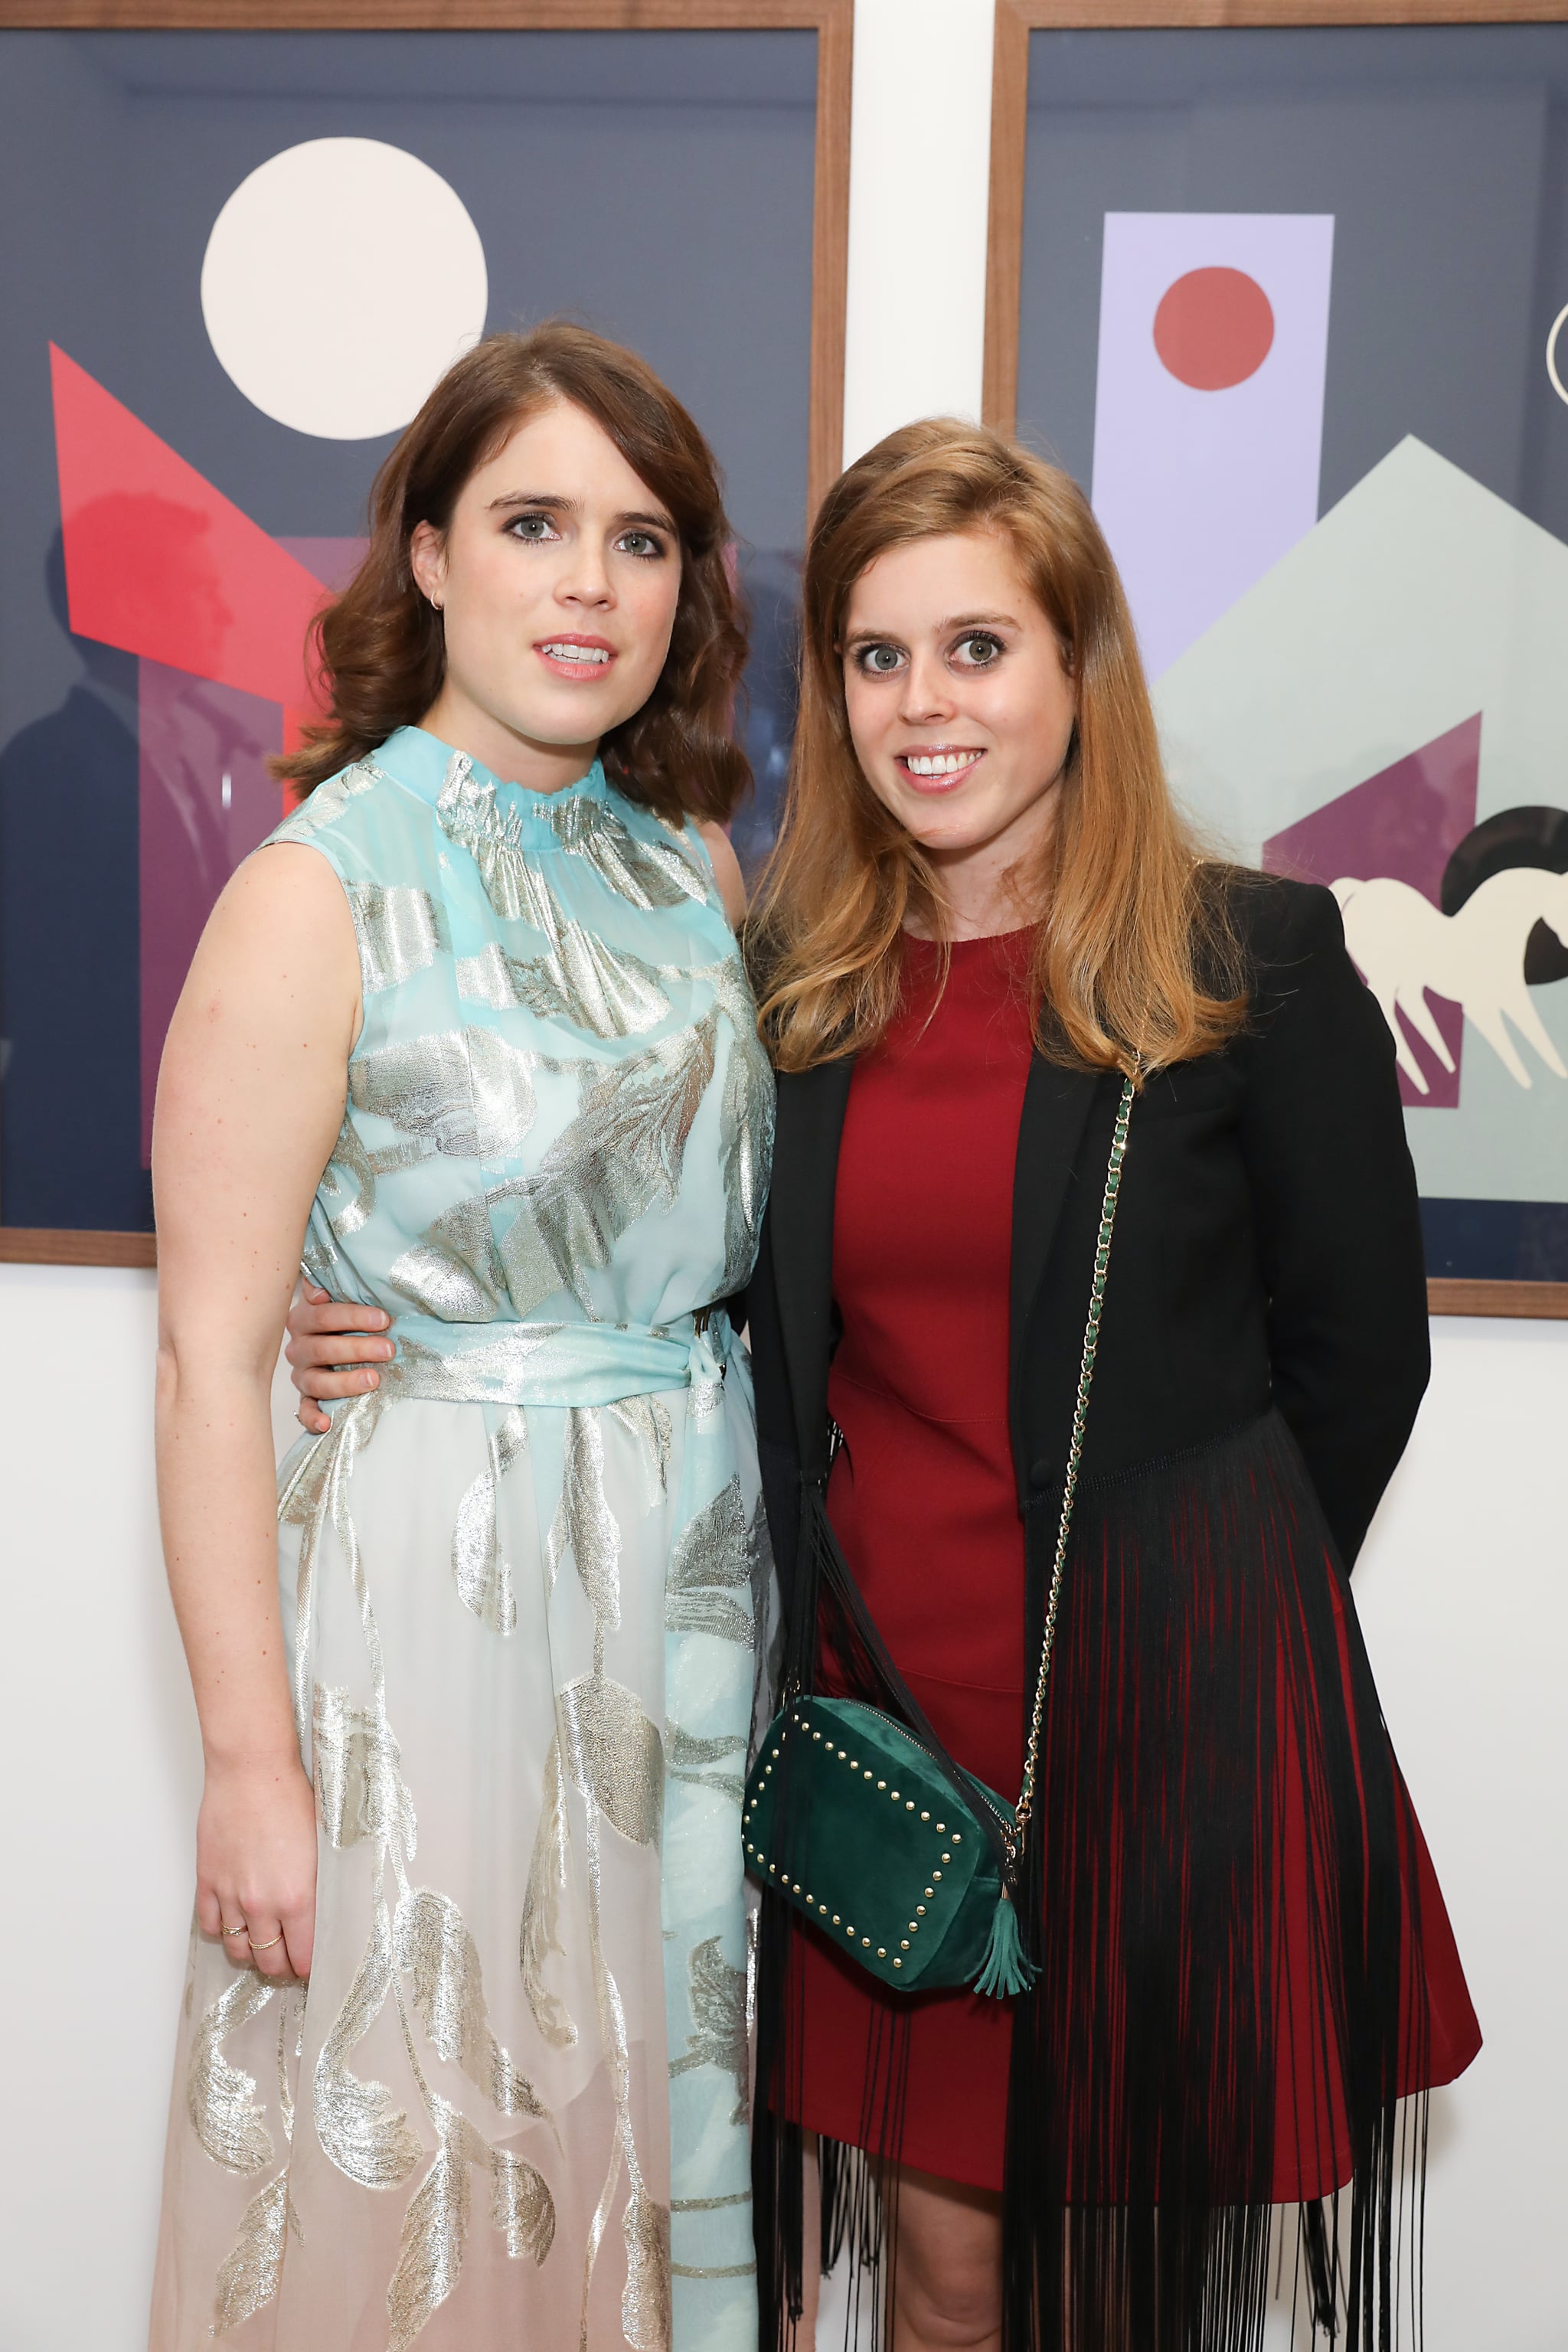 LONDON, ENGLAND - MAY 22: HRH Princess Eugenie of York (L) and HRH Princess Beatrice of York at the Animal Ball Art Show Private Viewing, presented by Elephant Family on May 22, 2019 in London, England. (Photo by David M. Benett/Dave Benett/Getty Images for Animal Ball)